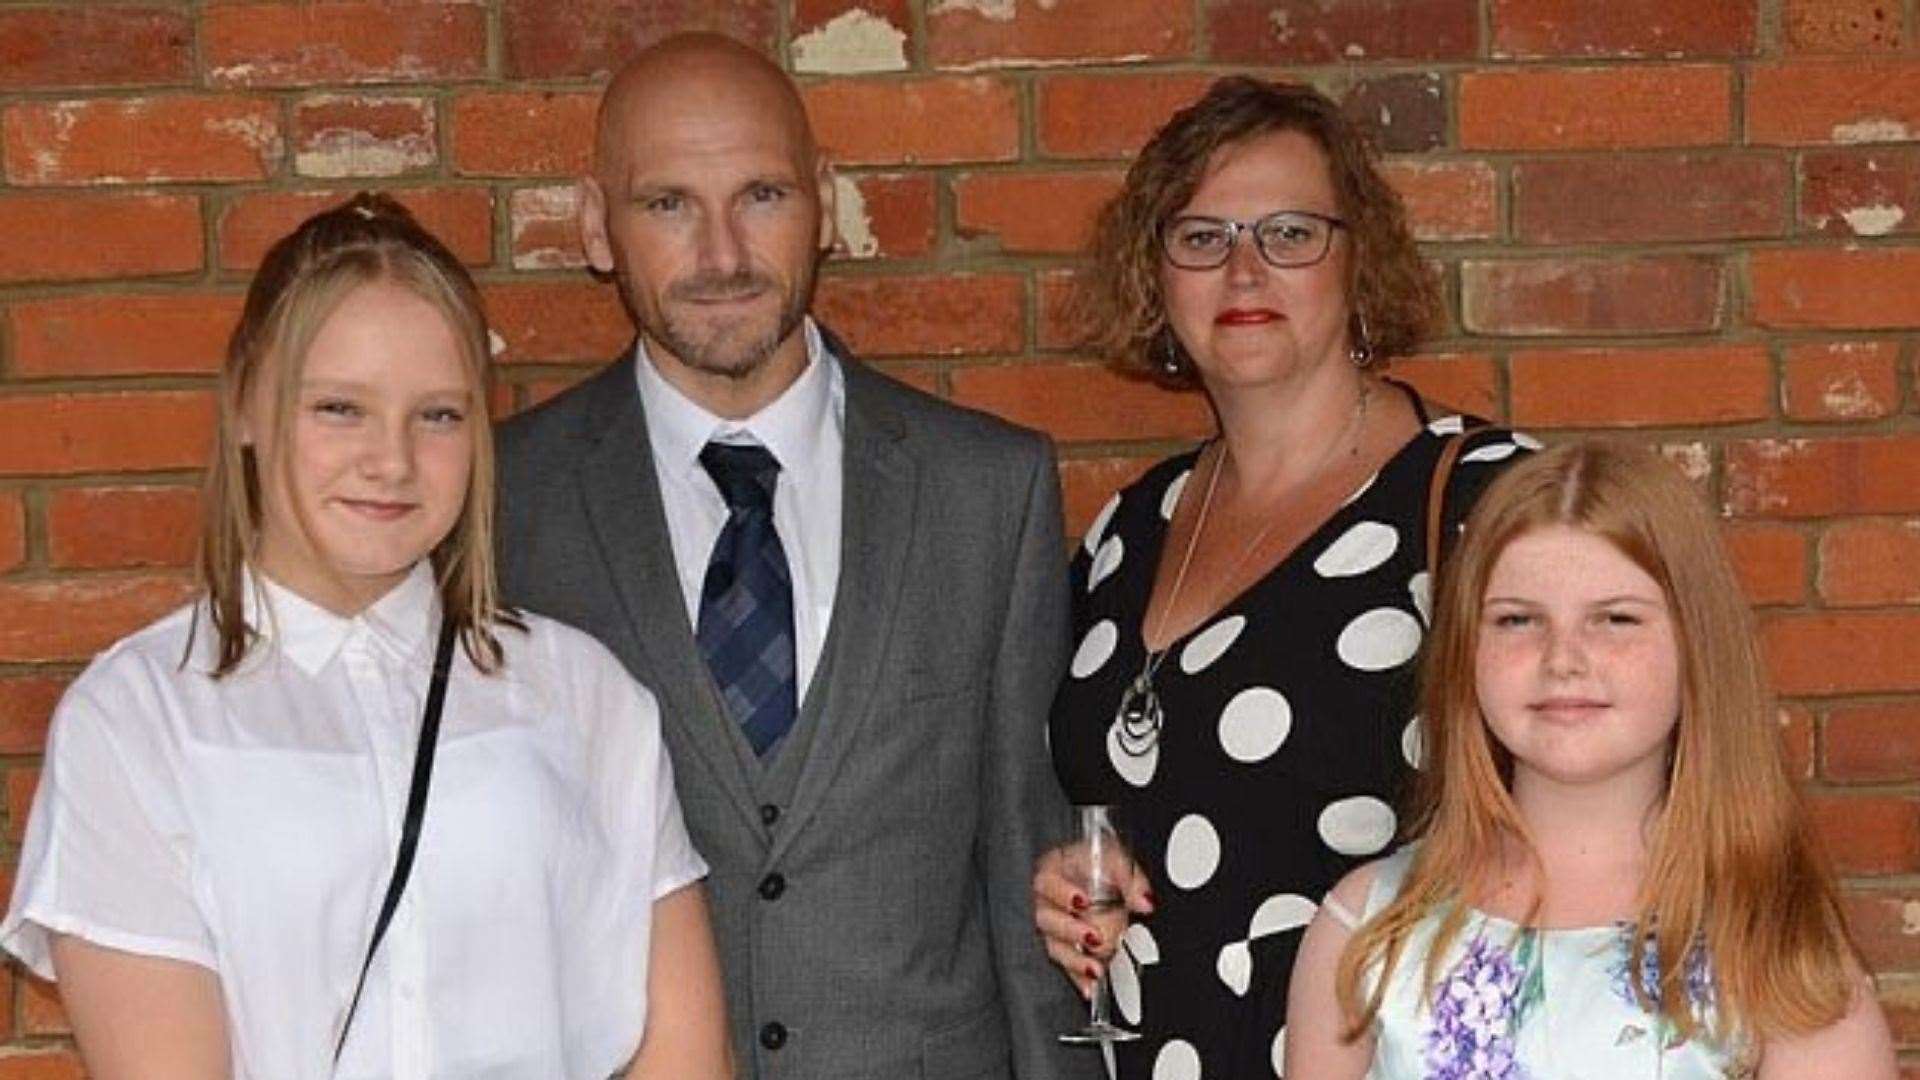 Carl and his family. Pictured (From left) is Carl's daughter Ruby, his wife Tracey and his stepdaughter Isabel. Picture: PA Real Life/Collect